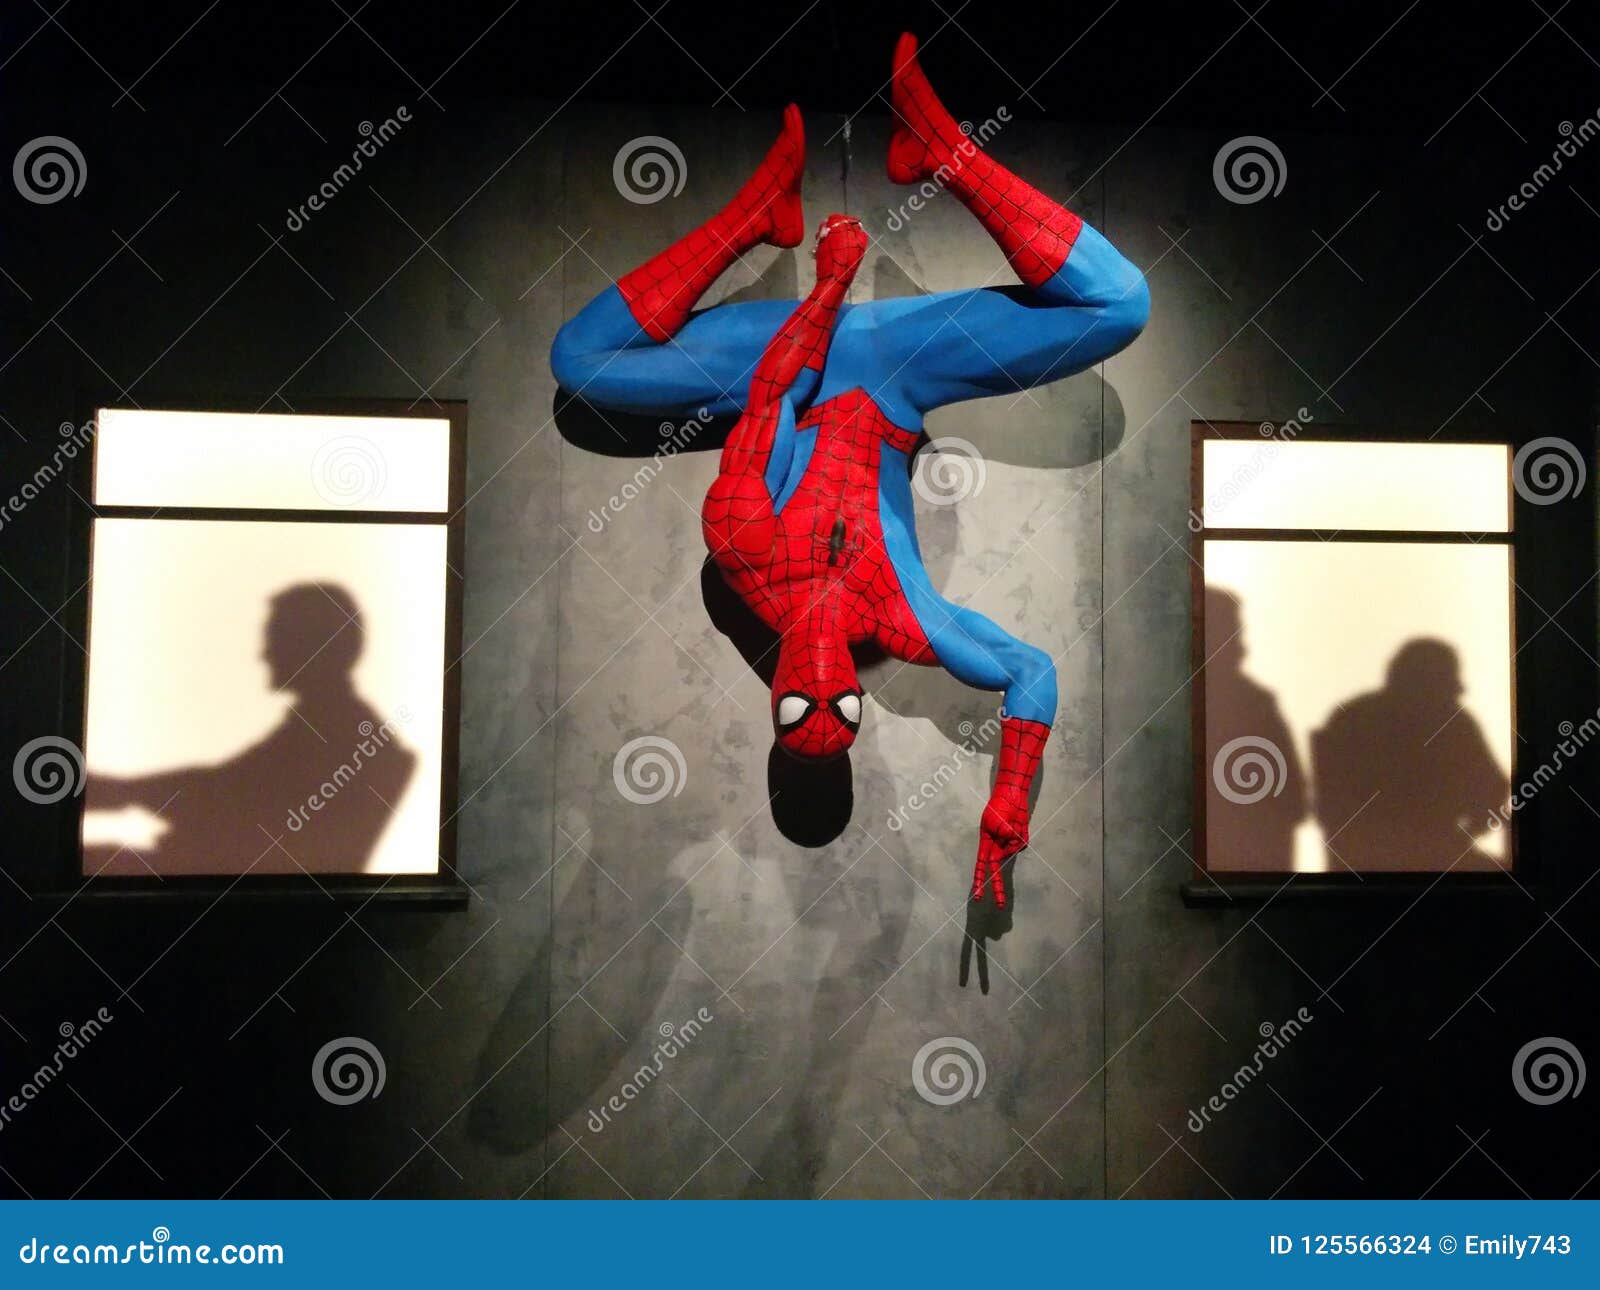 Spider-Man hanging upside down and giving the peace sign between two window...